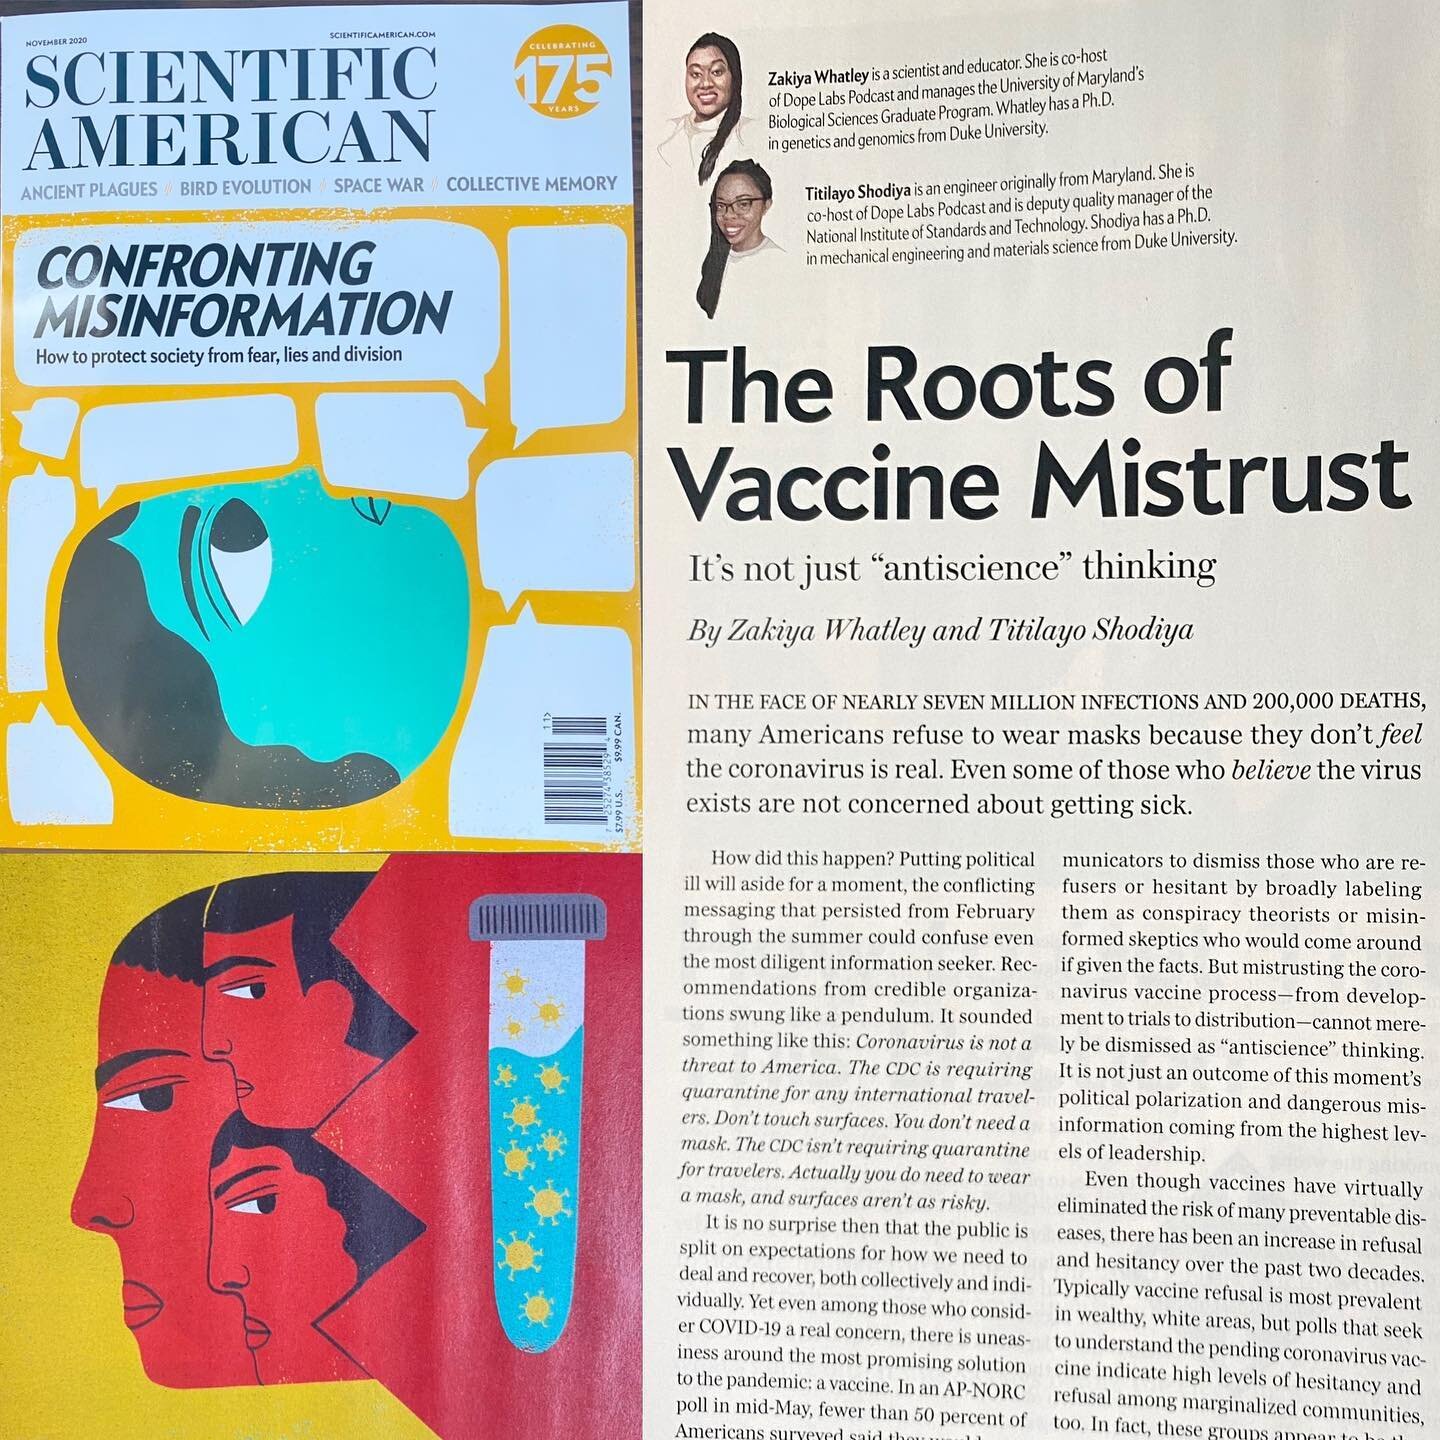 The vaccine is here!! 🎉 and both of us can&rsquo;t wait to take it! We knew not everyone would feel this way, so we wrote an article for the November issue of Scientific American (@scientific_american ). It&rsquo;s all about the rightful skepticism 